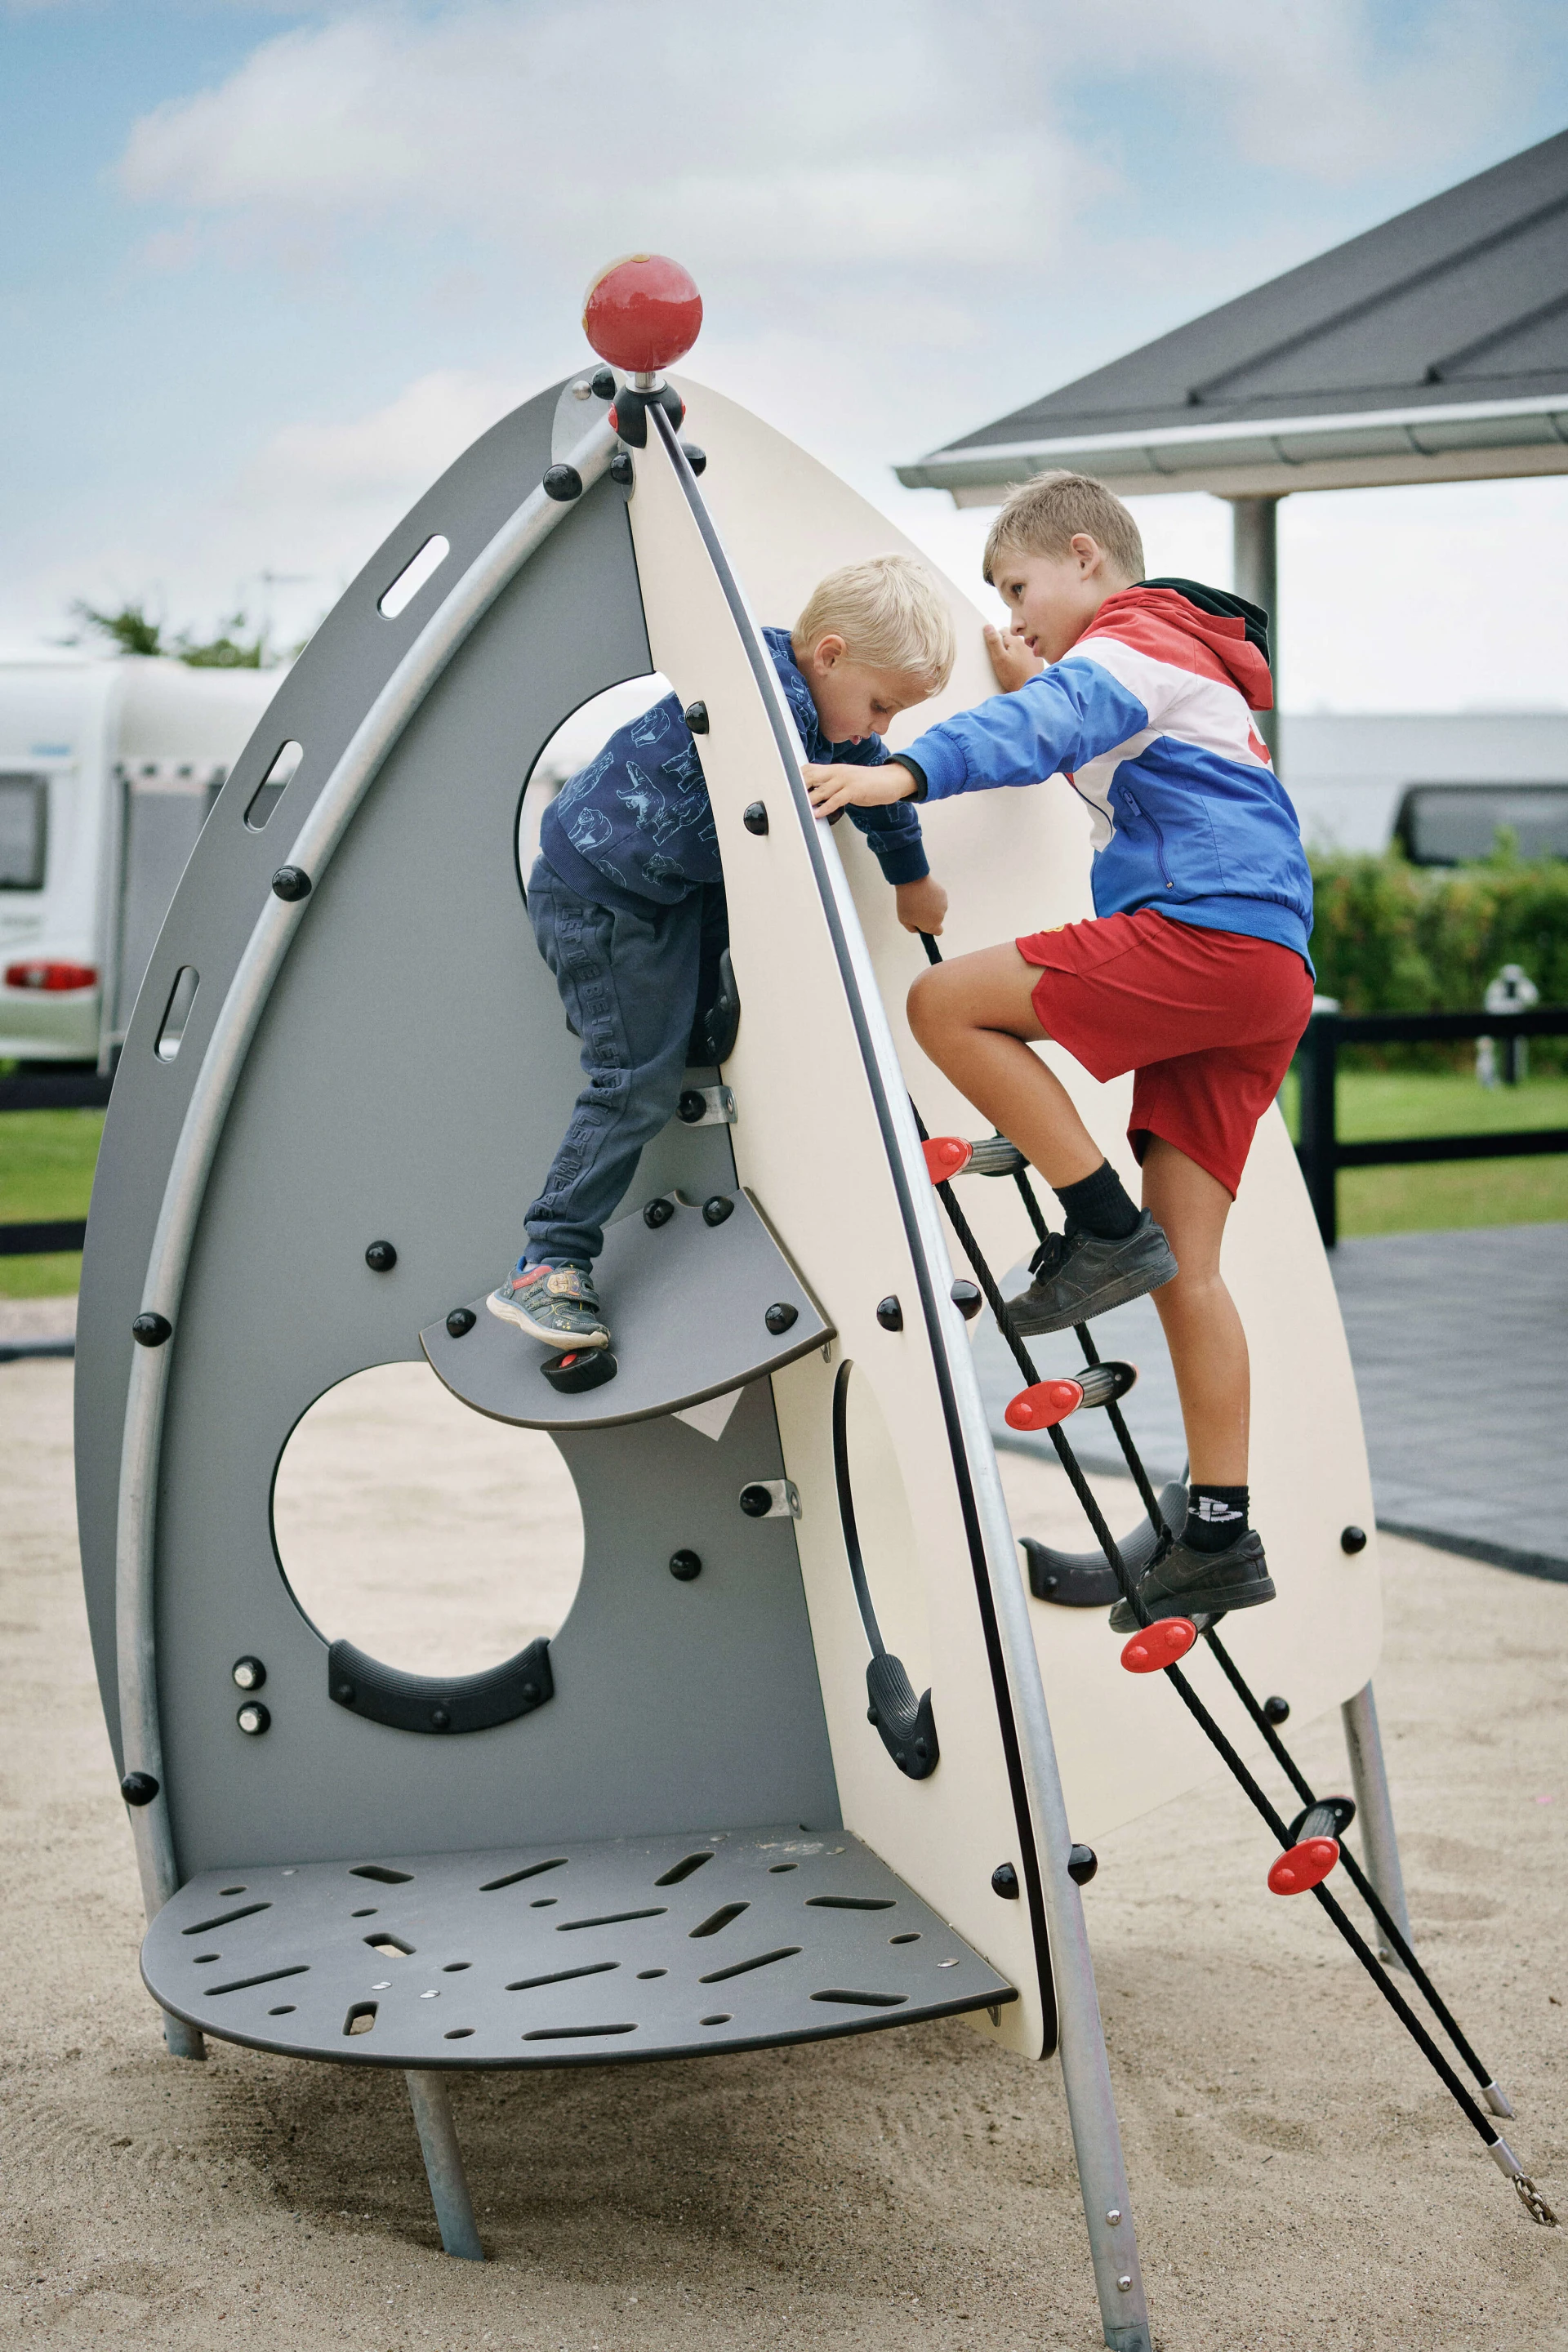 Children playing on space themed playground equipment at CampOne camping